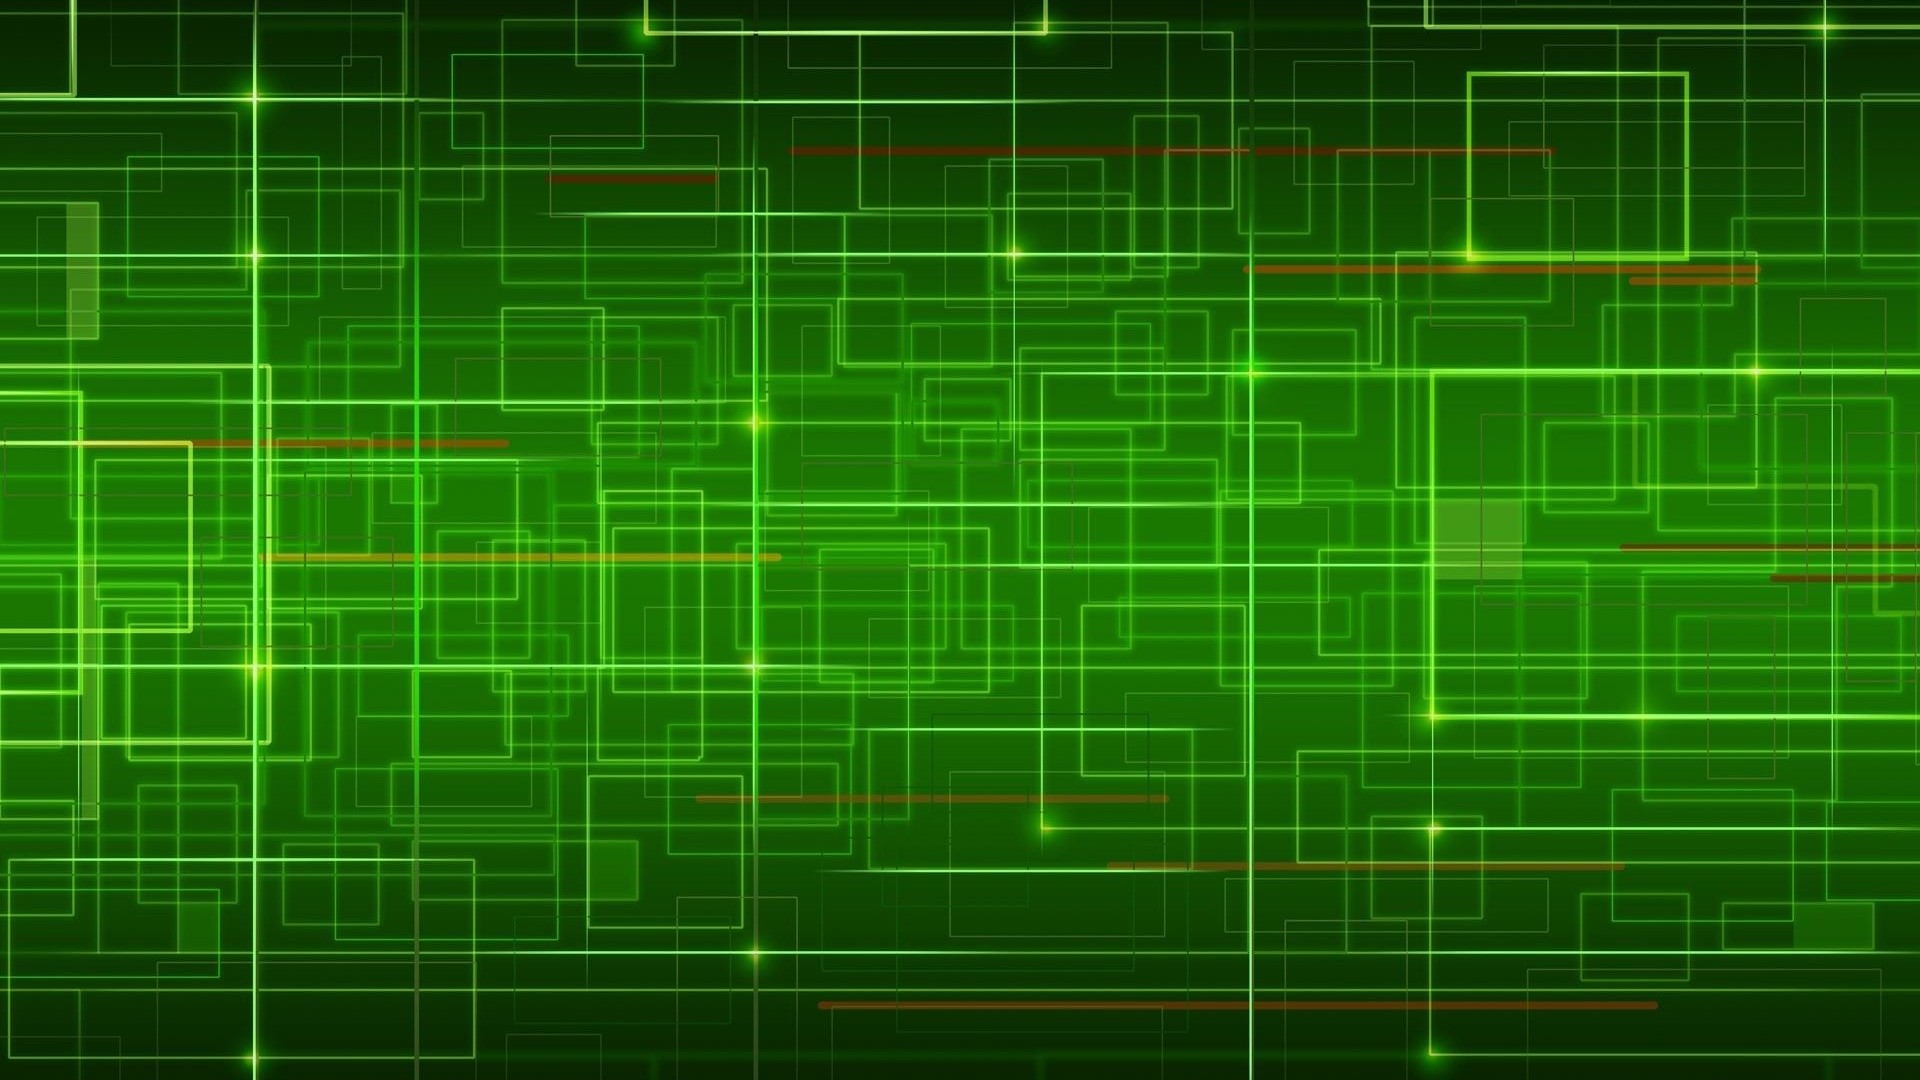 Black and Green Desktop Backgrounds With Resolution 1920X1080 pixel. You can make this wallpaper for your Desktop Computer Backgrounds, Mac Wallpapers, Android Lock screen or iPhone Screensavers